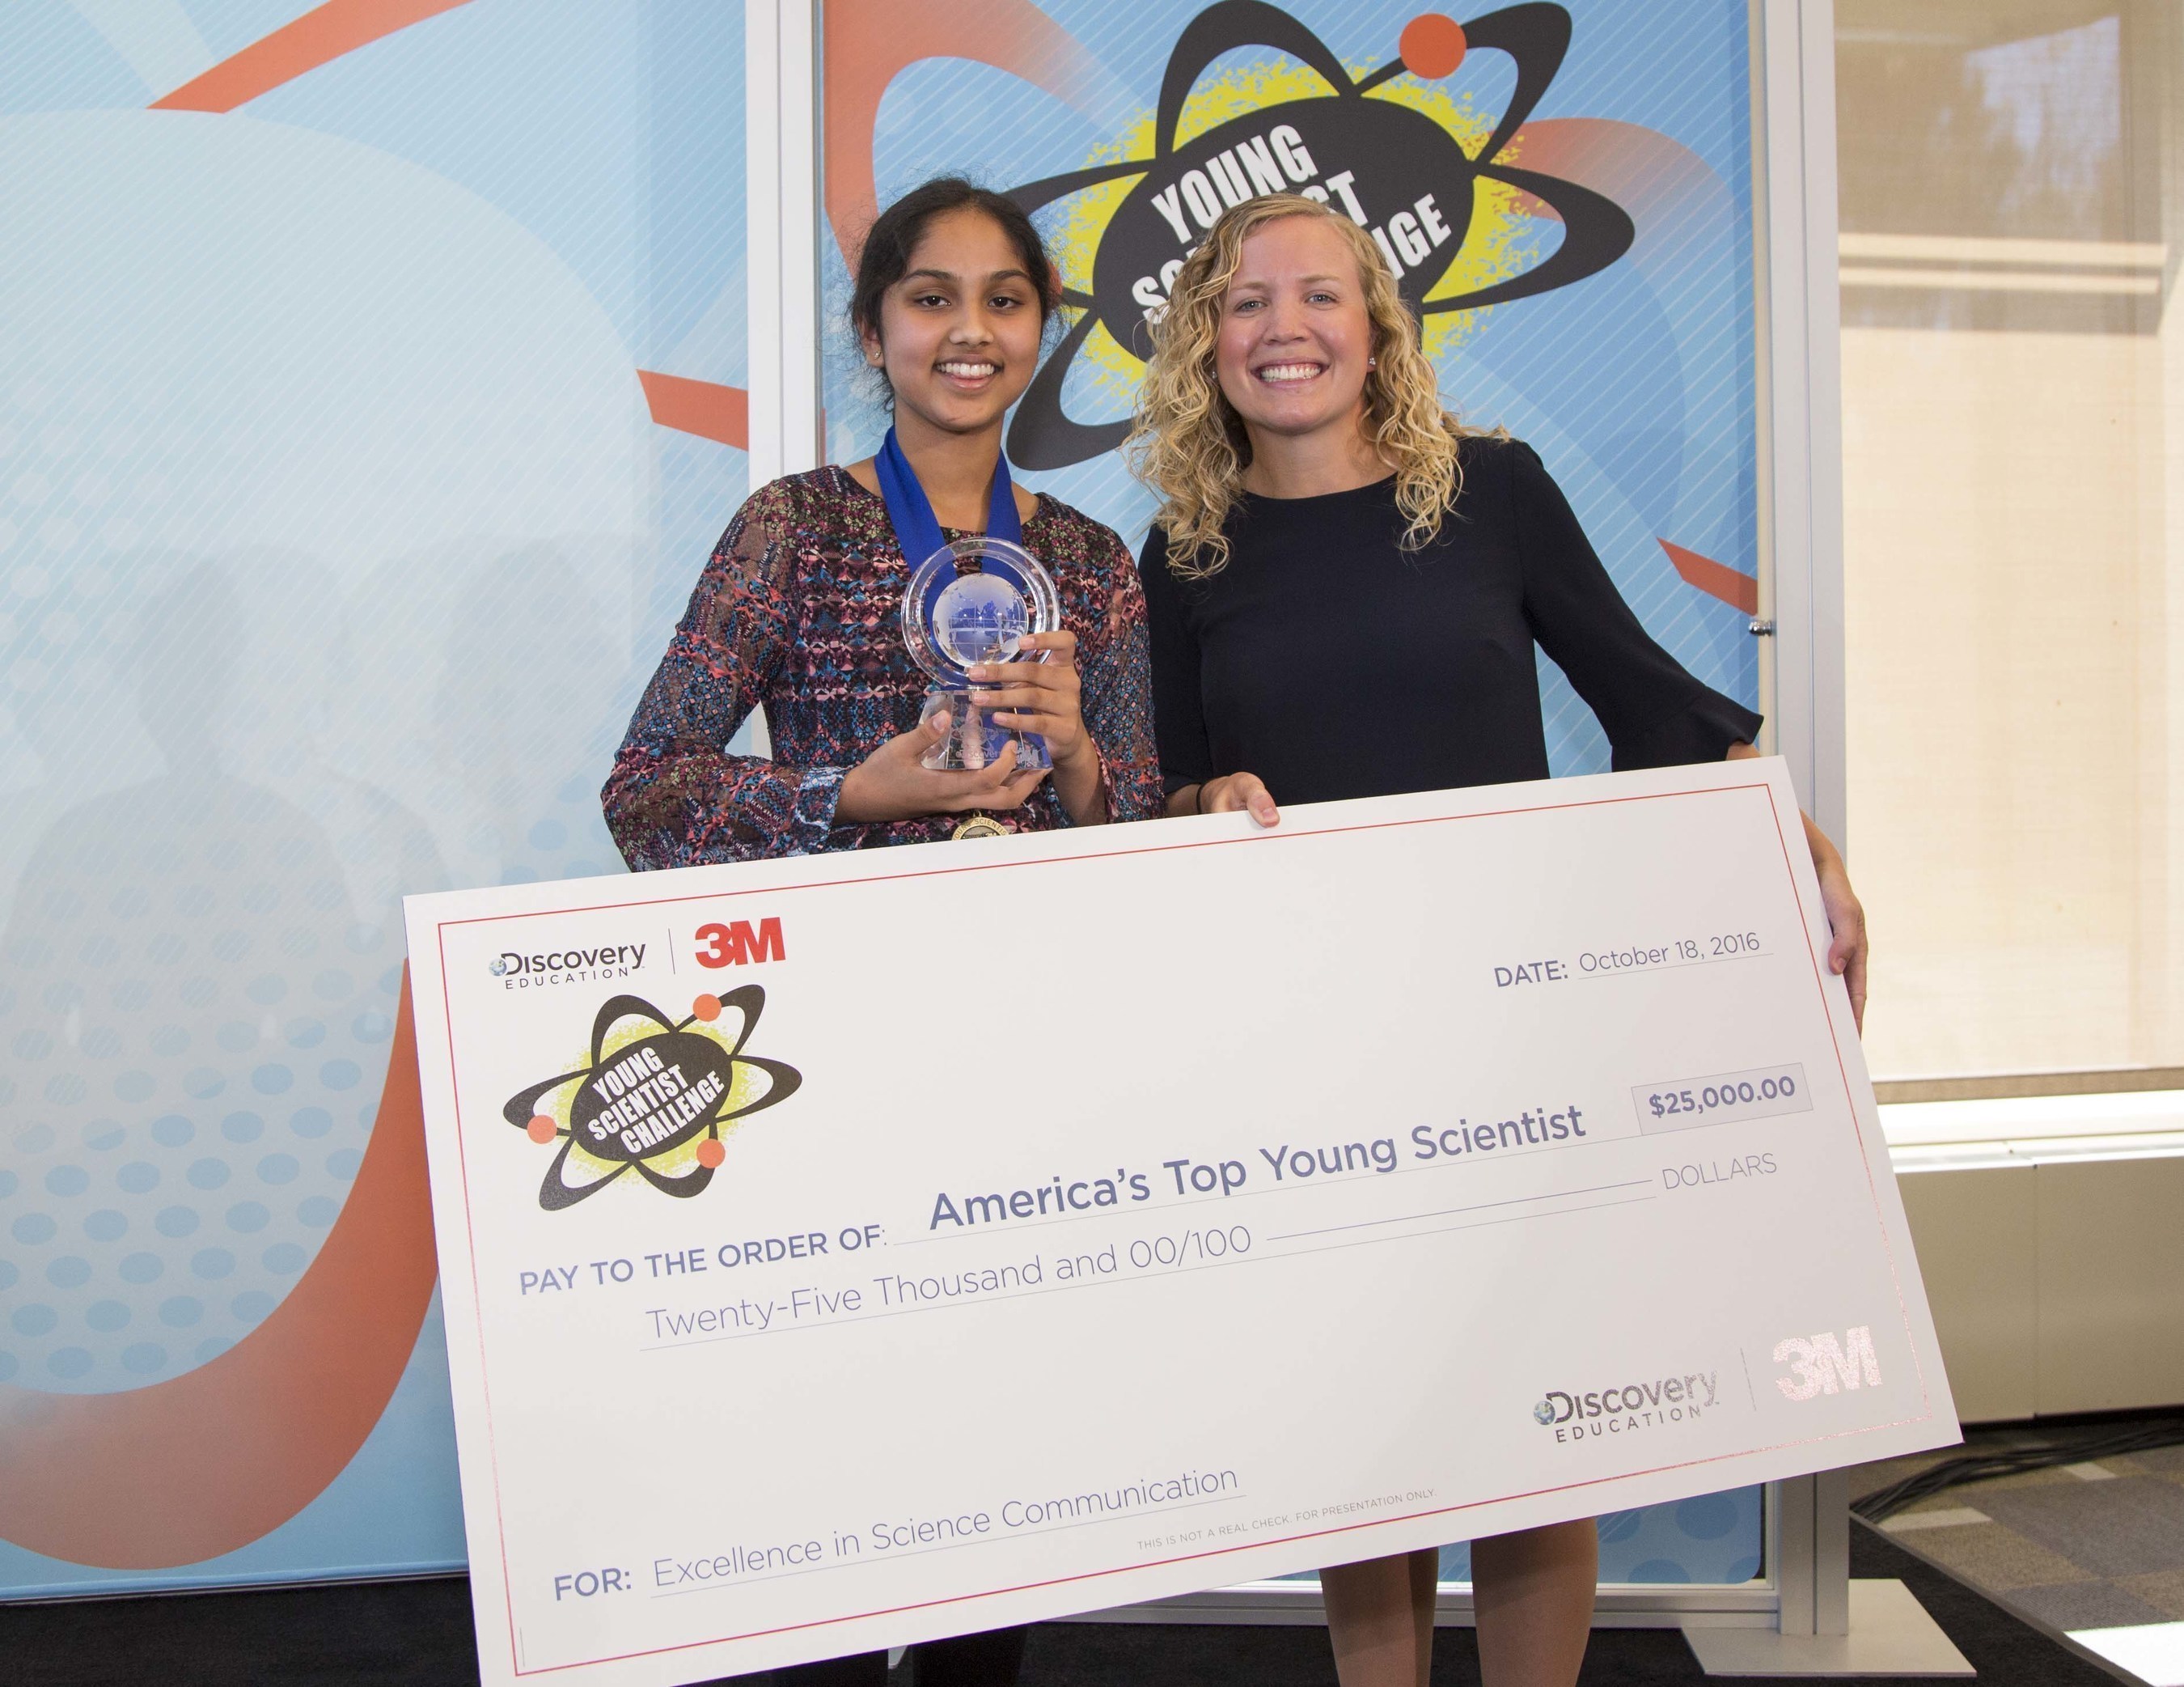 Grand prize winner Maanasa Mendu with 3M scientist mentor Margaux Mitera at the 2016 Discovery Education 3M Young Scientist Challenge in St. Paul, MN.